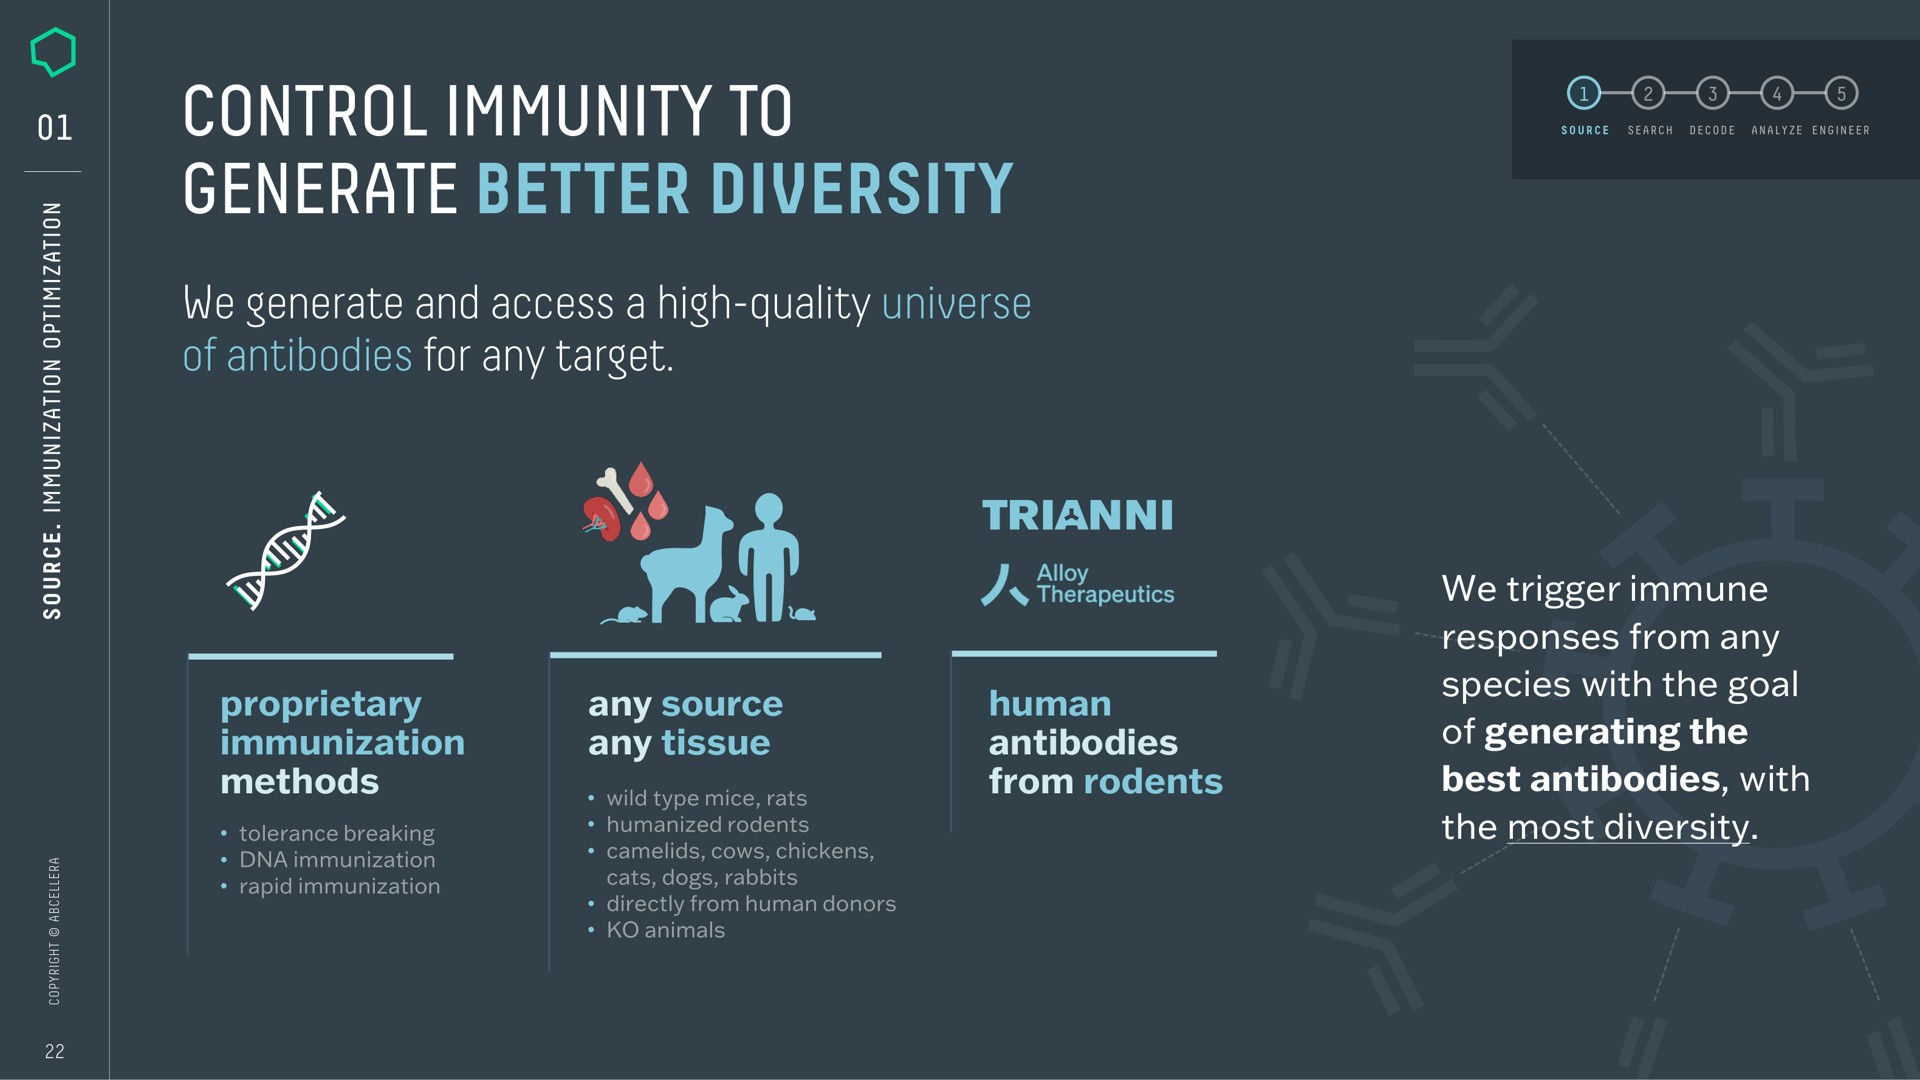 control immunity to generate better diversity we generate and access a high quality universe of antibodies for any target proprietary immunization methods any source any tissue human antibodies from rodents we trigger immune responses from any species with the goal of generating the best antibodies with the most diversity | AbCellera